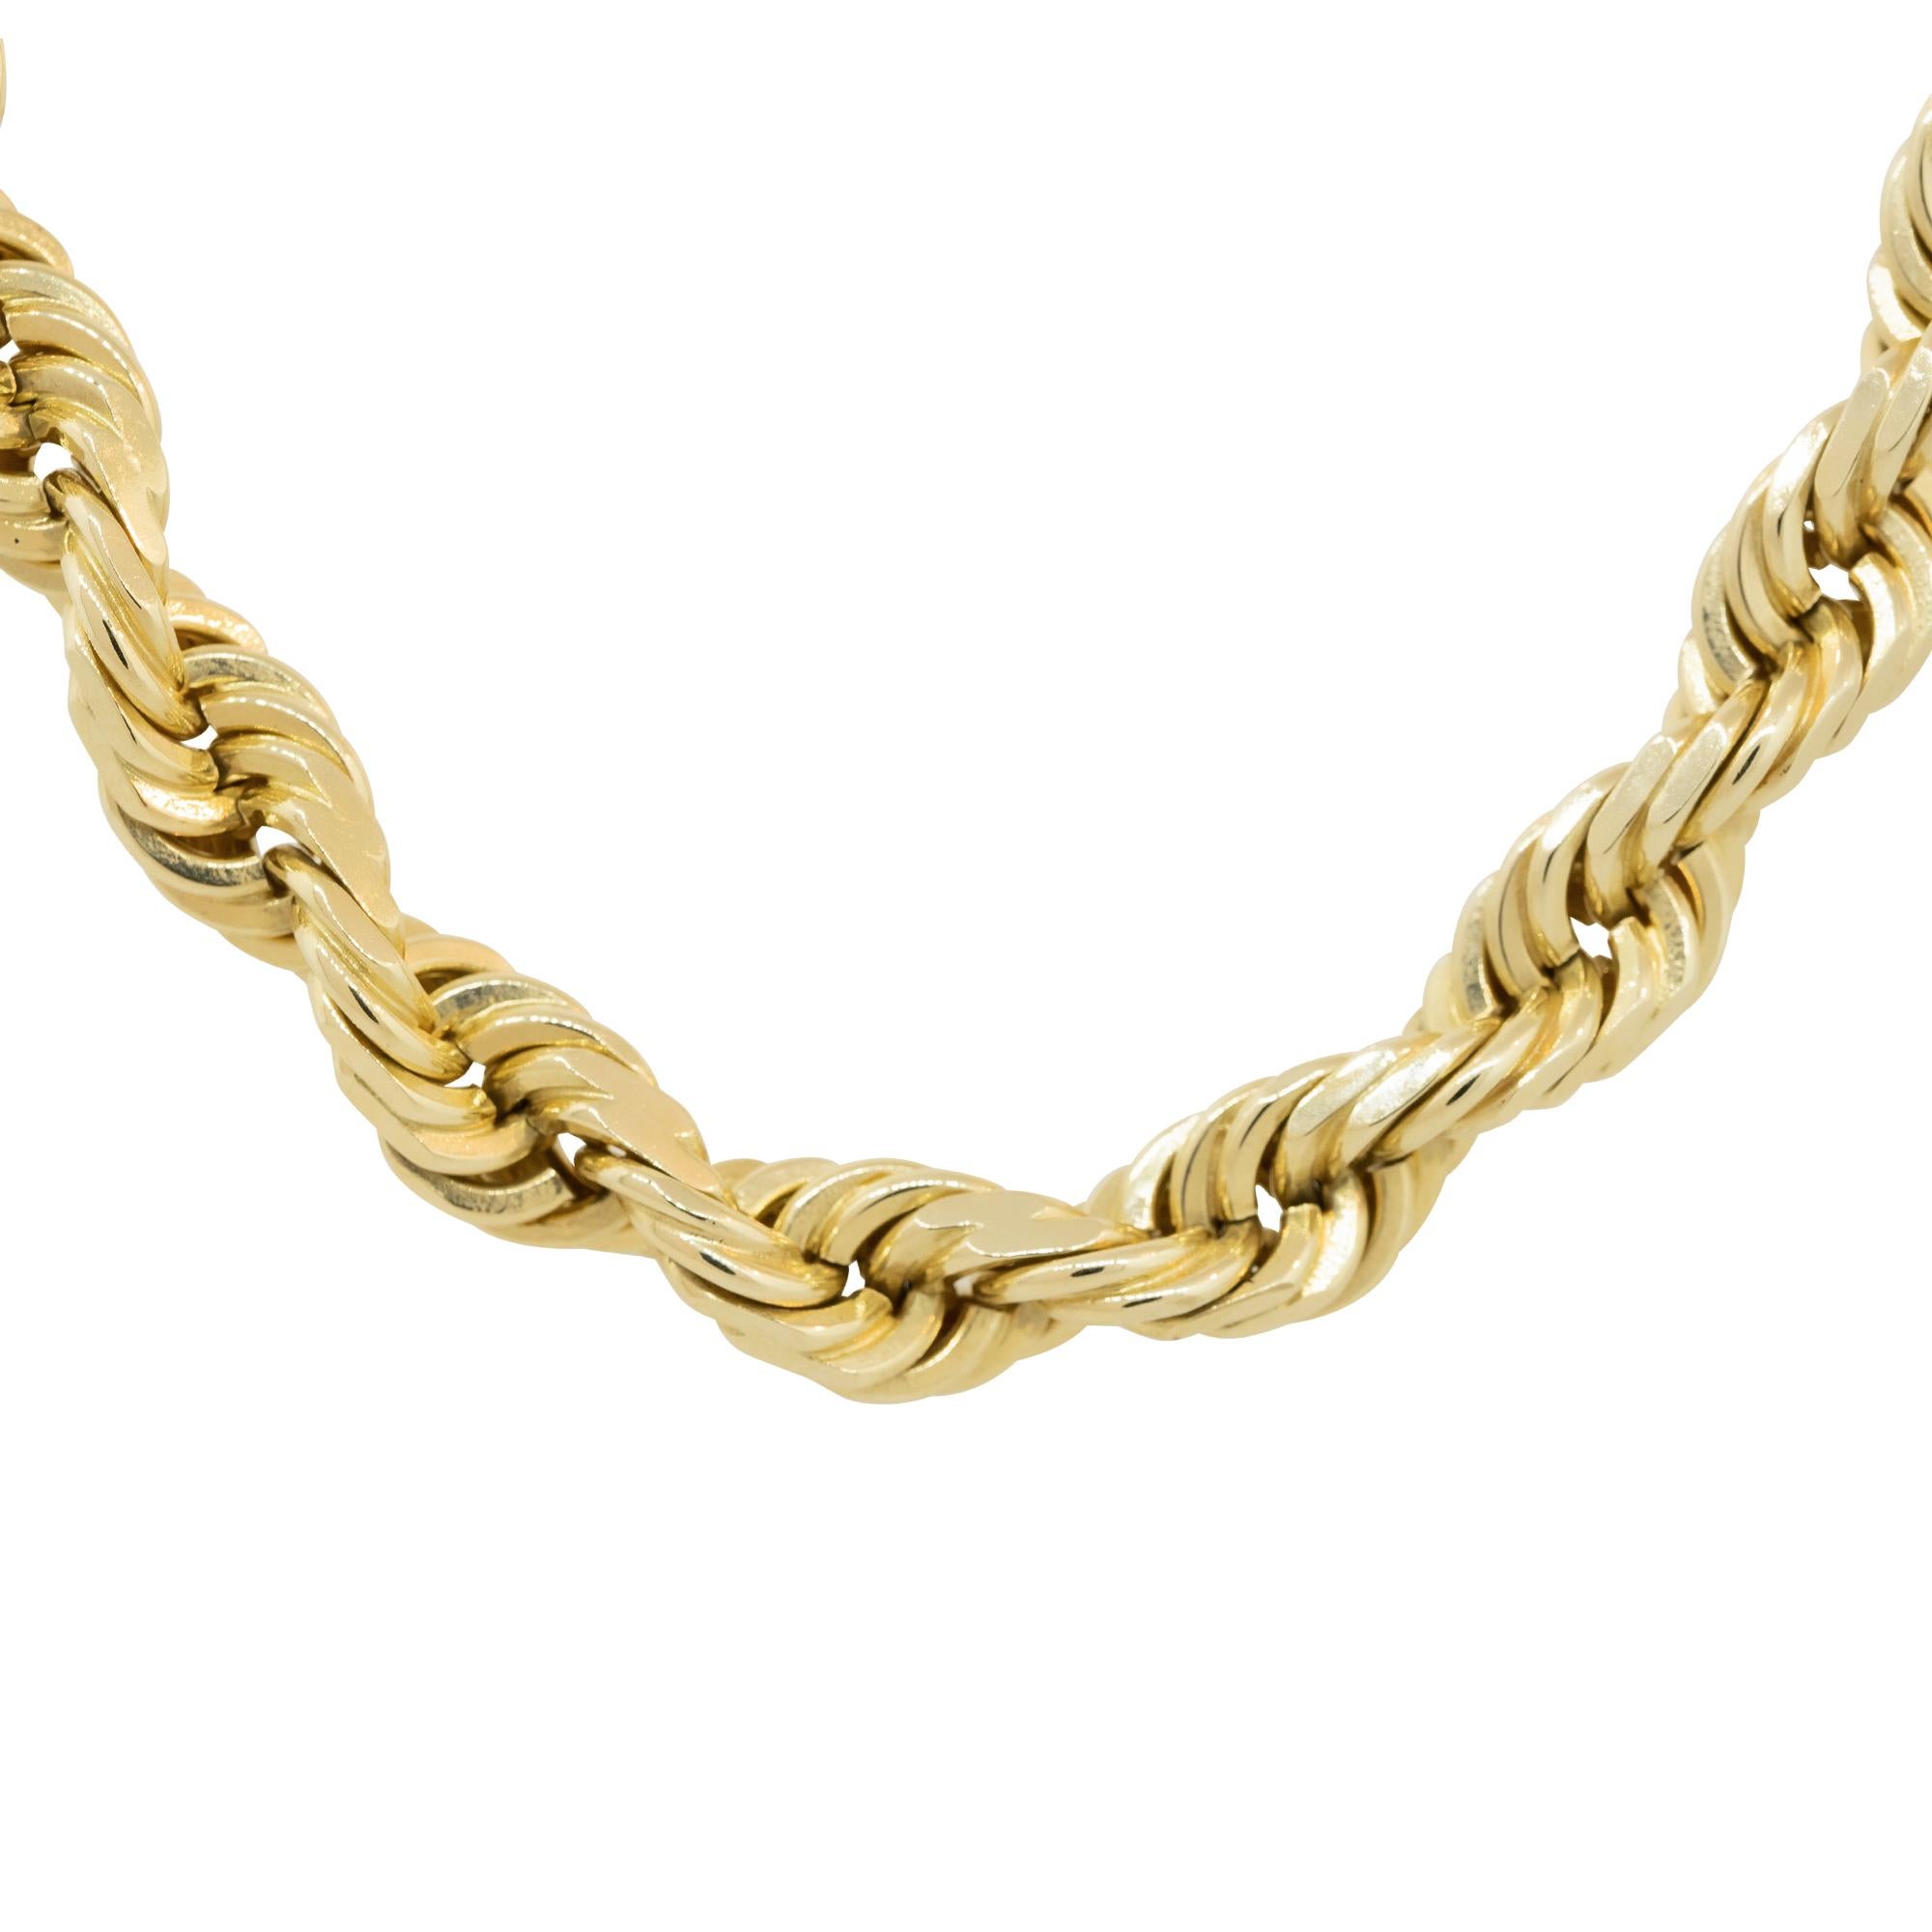 14k Yellow Gold 26″ Men's Solid Rope Chain

Material: 14k Yellow Gold
Measurements: Necklace Measures 26″ in Length and 9.38mm in width
Fastening: Spring Ring Clasp
Item Weight: 178.4g (114.7dwt)
Additional Details: This item comes with a